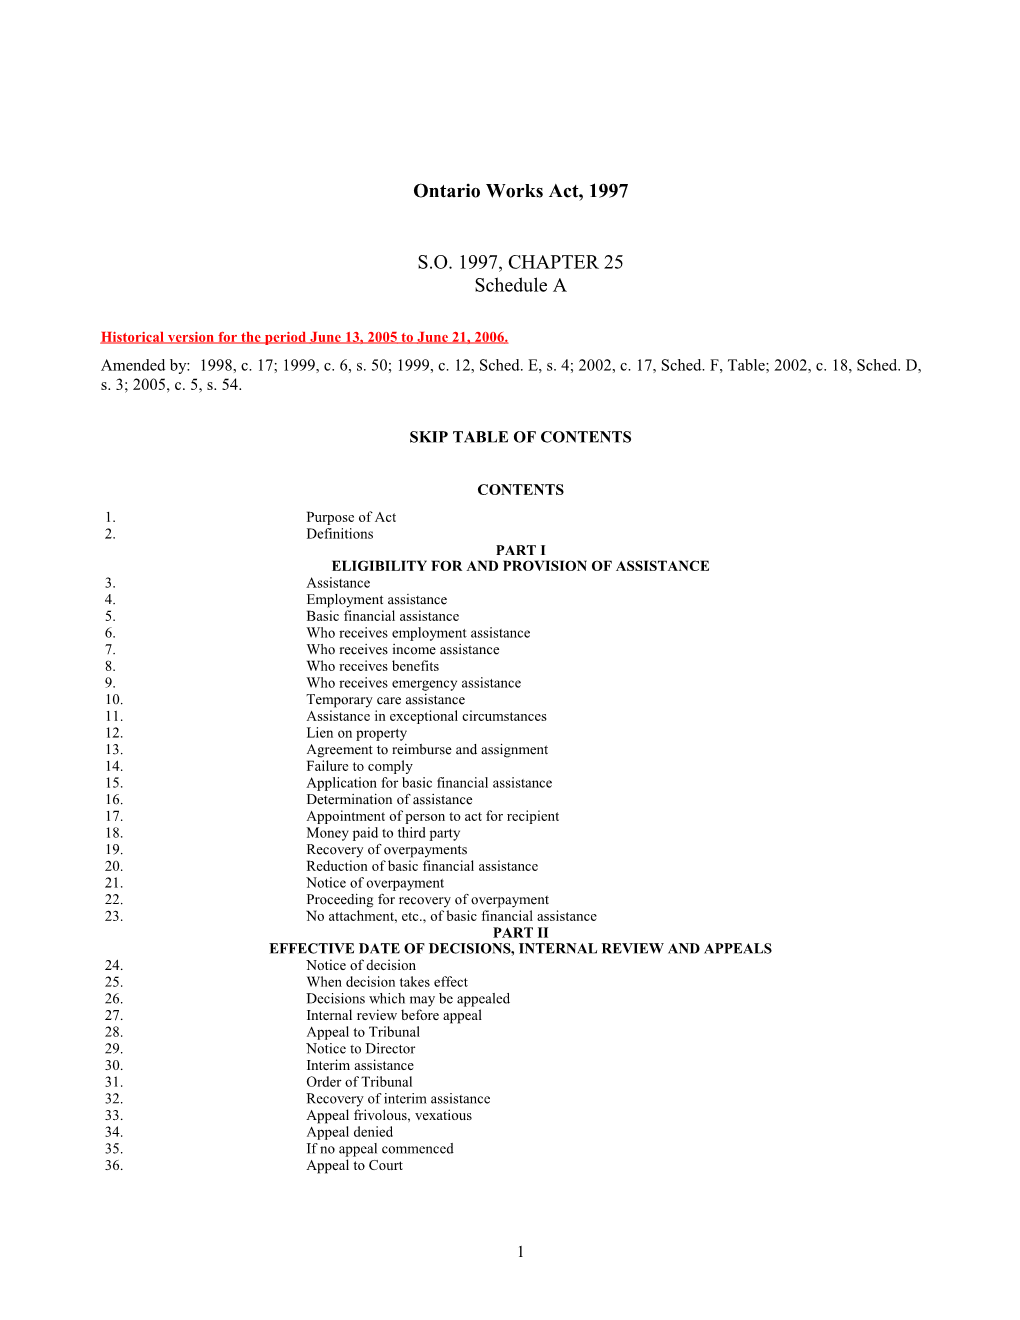 Ontario Works Act, 1997, S.O. 1997, C. 25, Sched. A